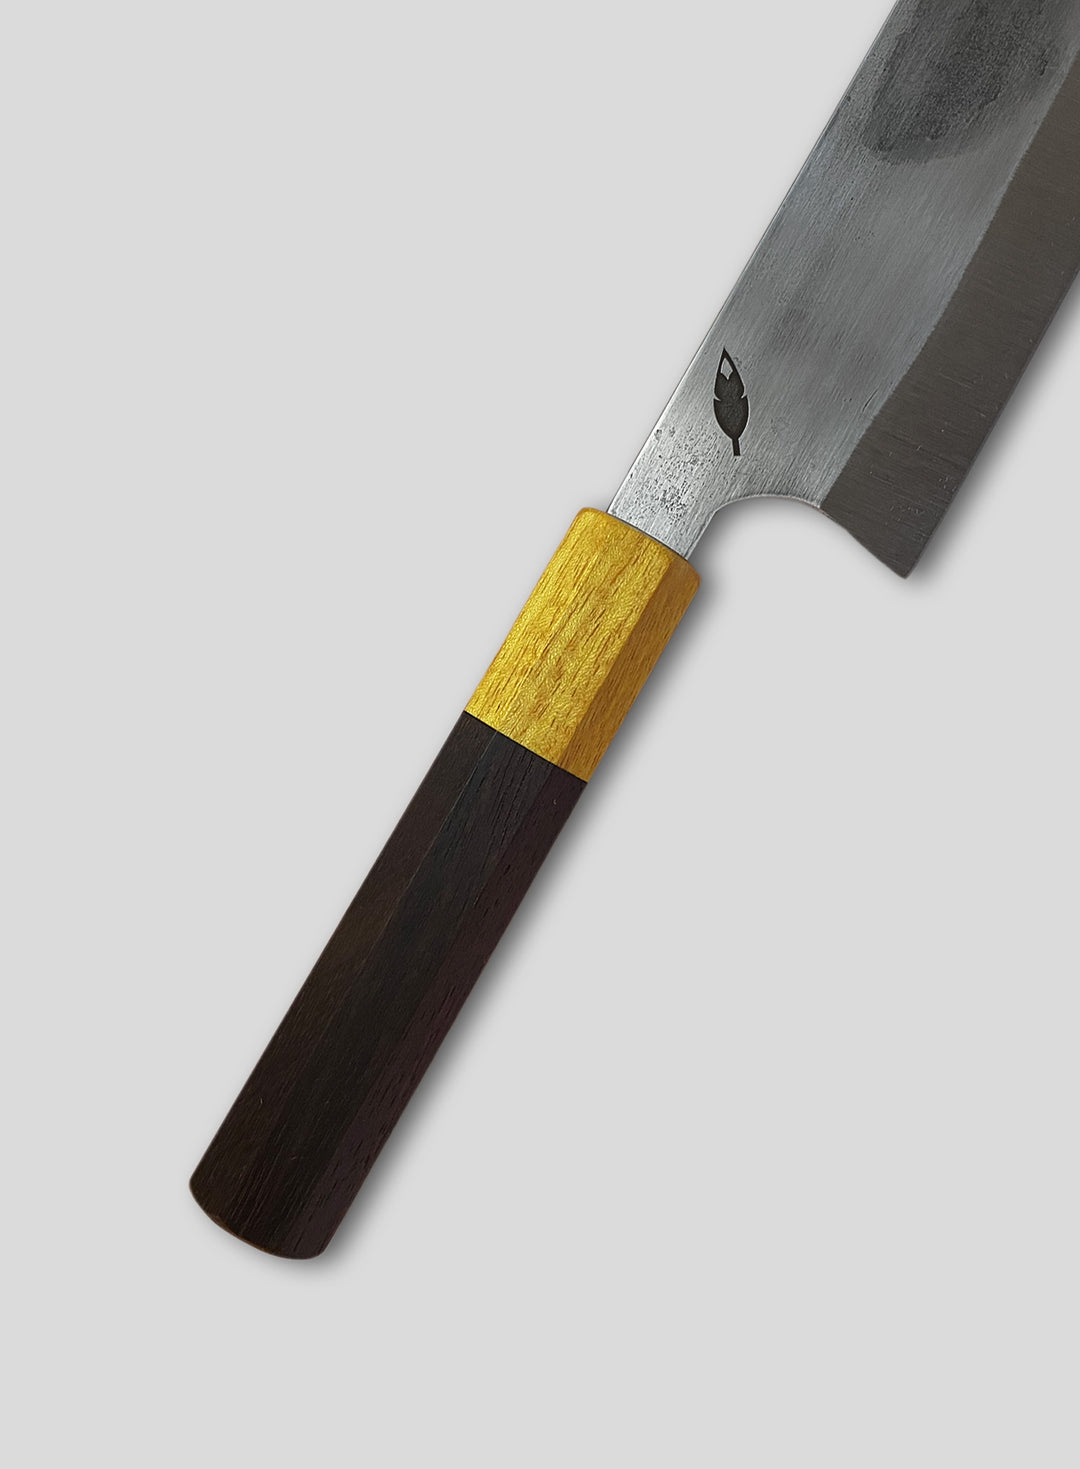 Limited Edition Noa (Guayacan and Mulberry Handle)